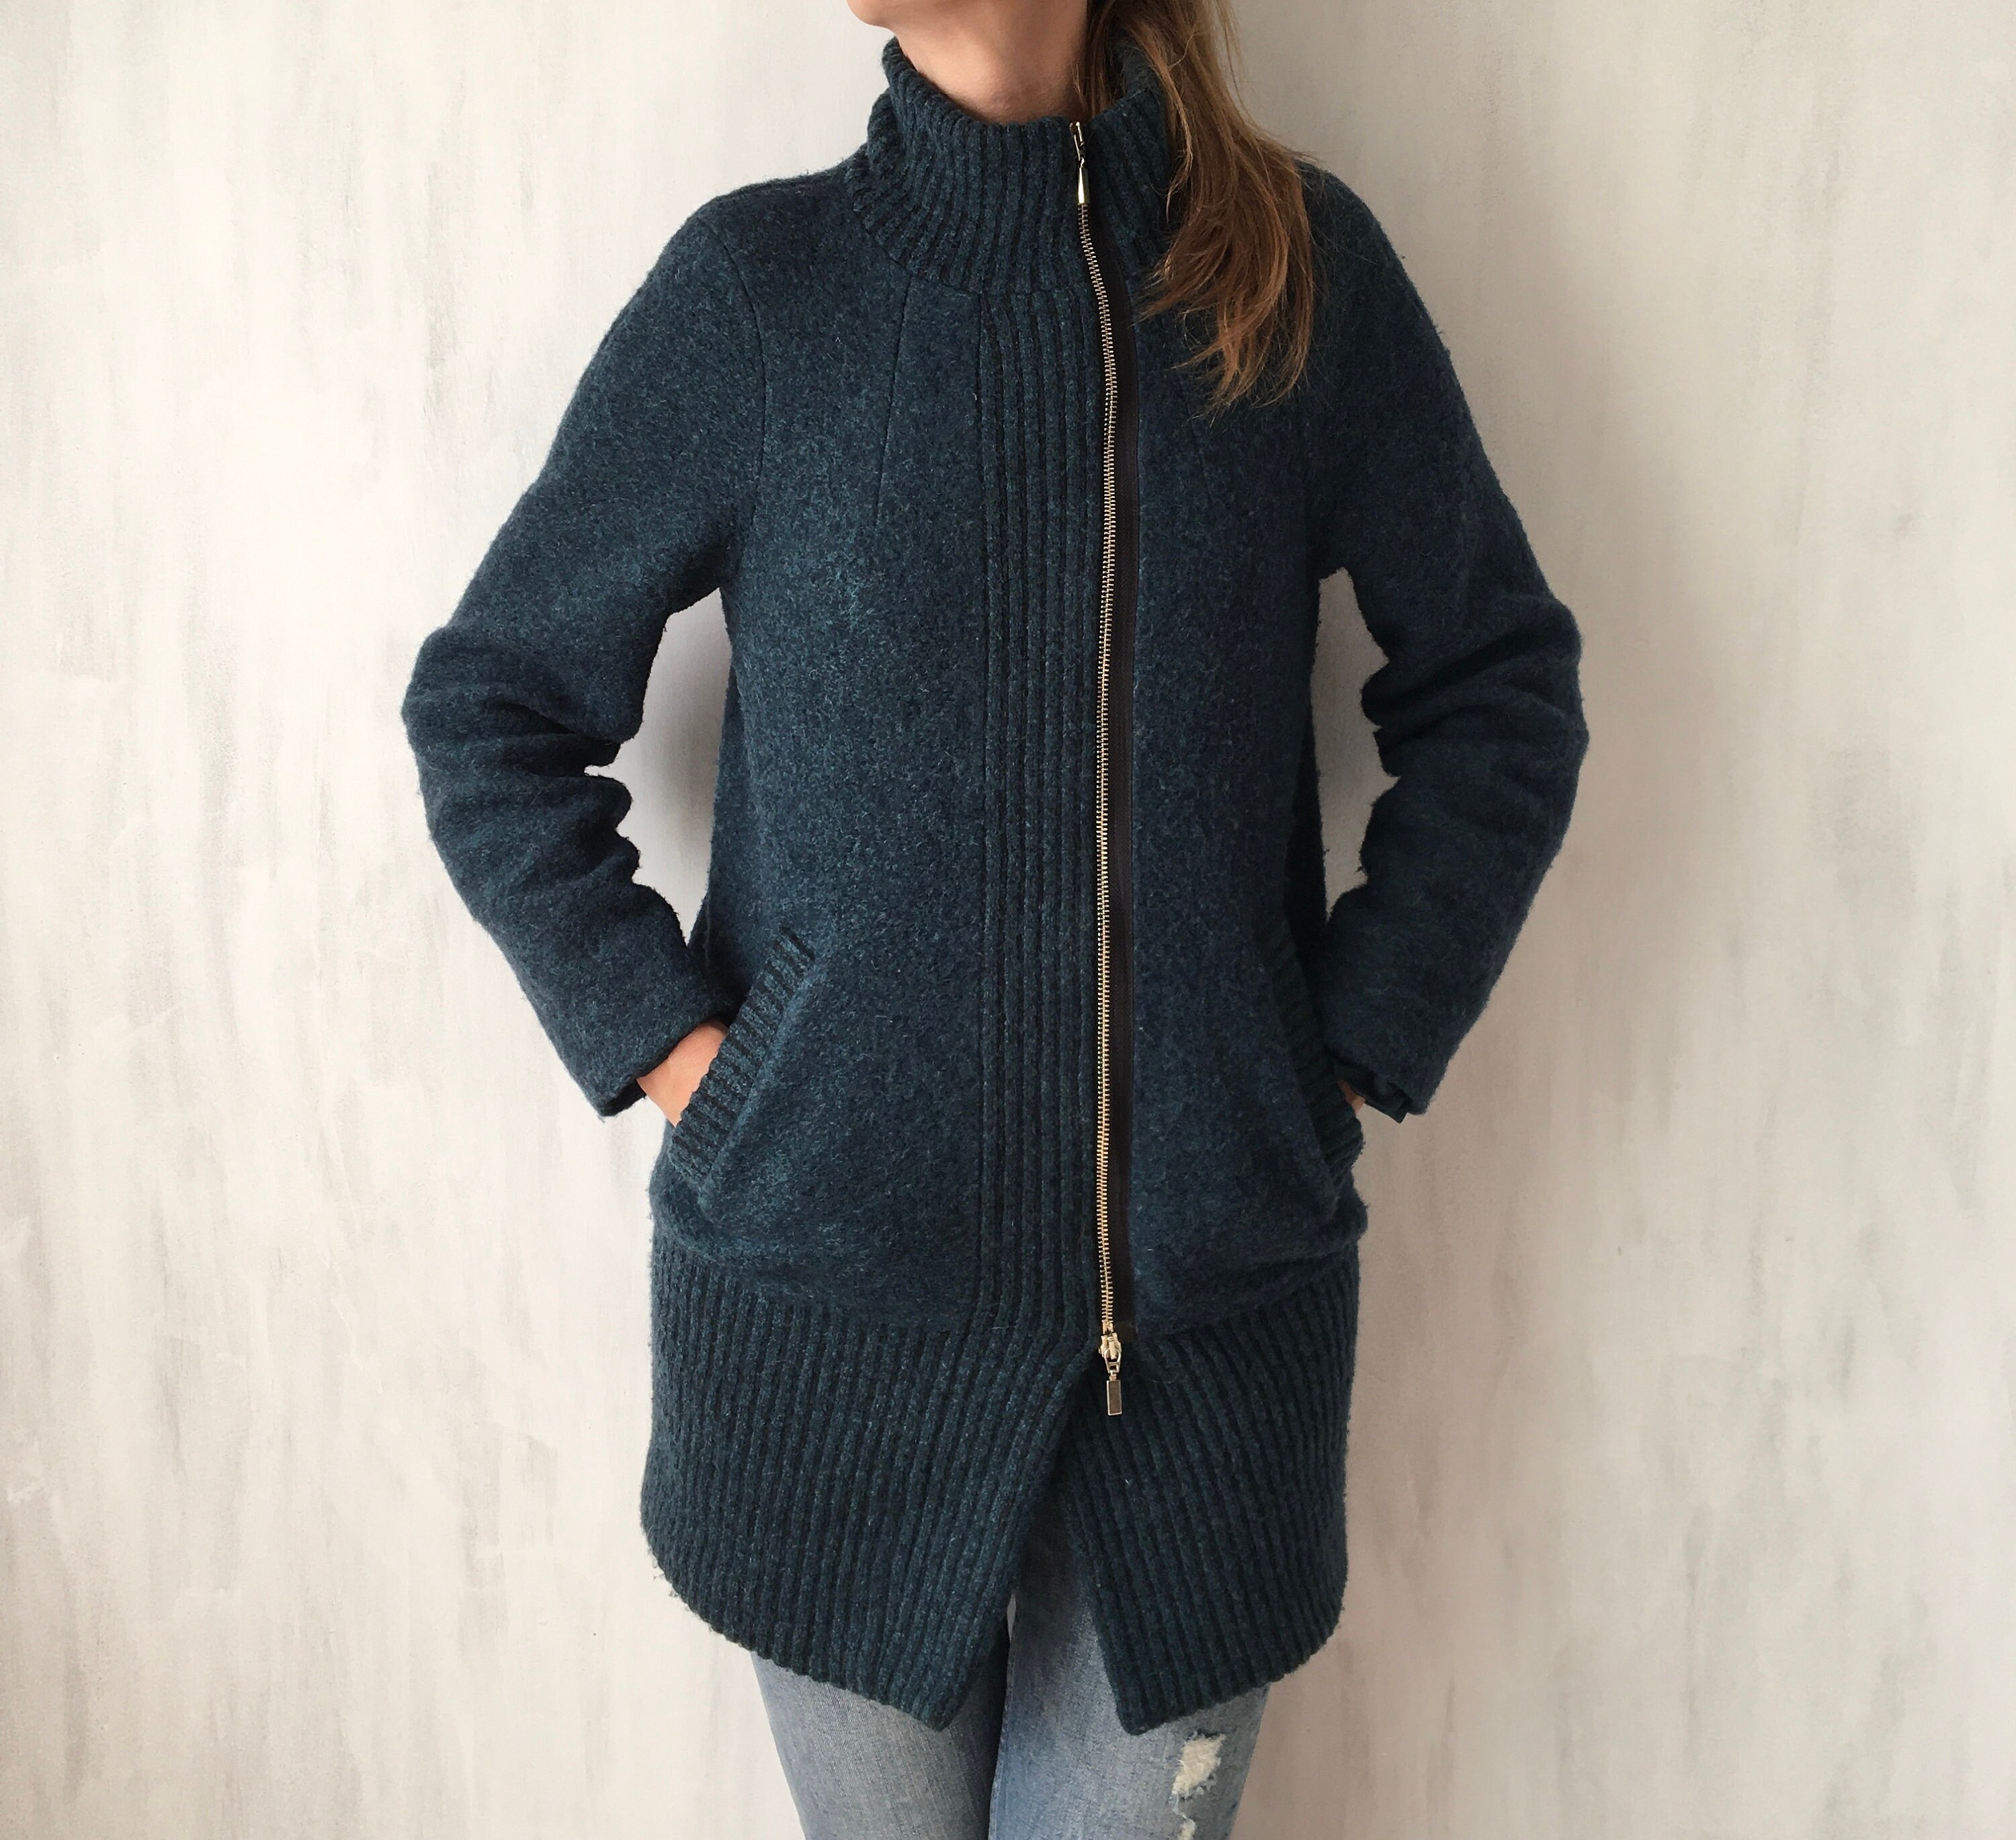 Vintage Wool Blend Coat, High Neck Cardigan For Women, Warm Winter Long Sweater With Zipper. M Size